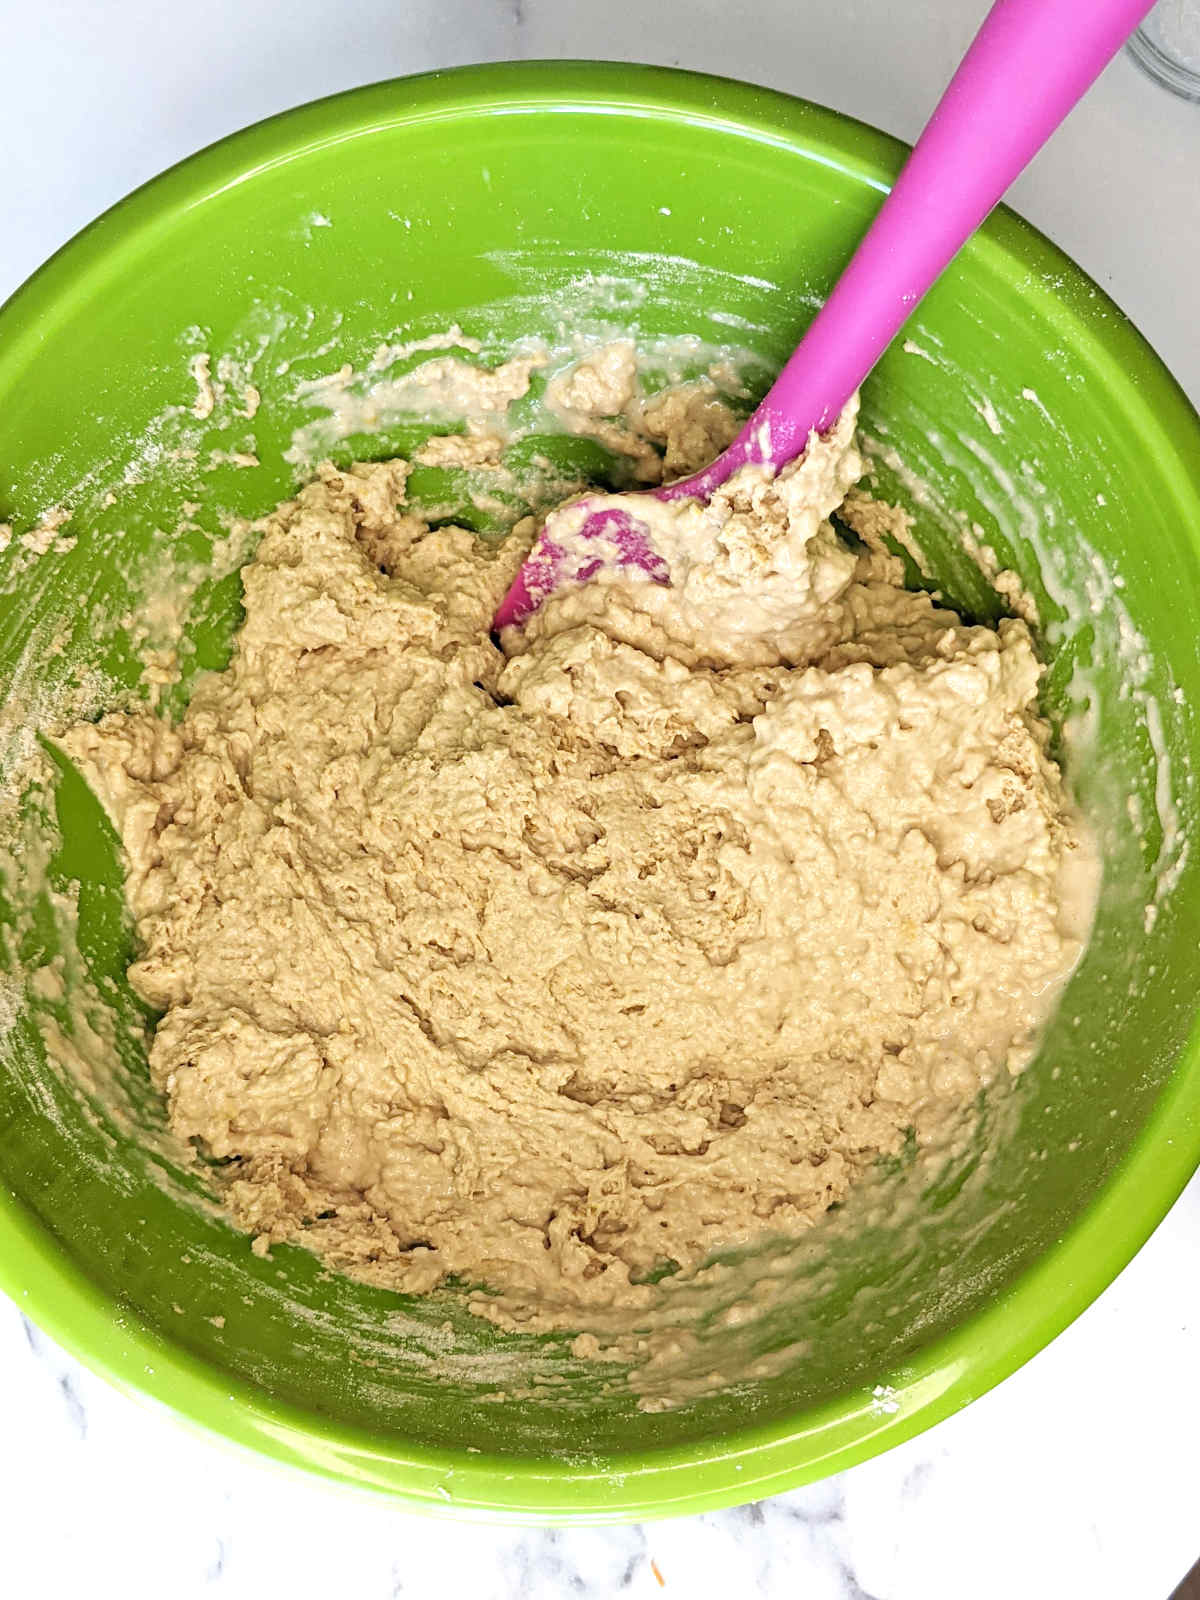 Savory vegan muffin batter in green mixing bowl mixed together before adding vegetables.